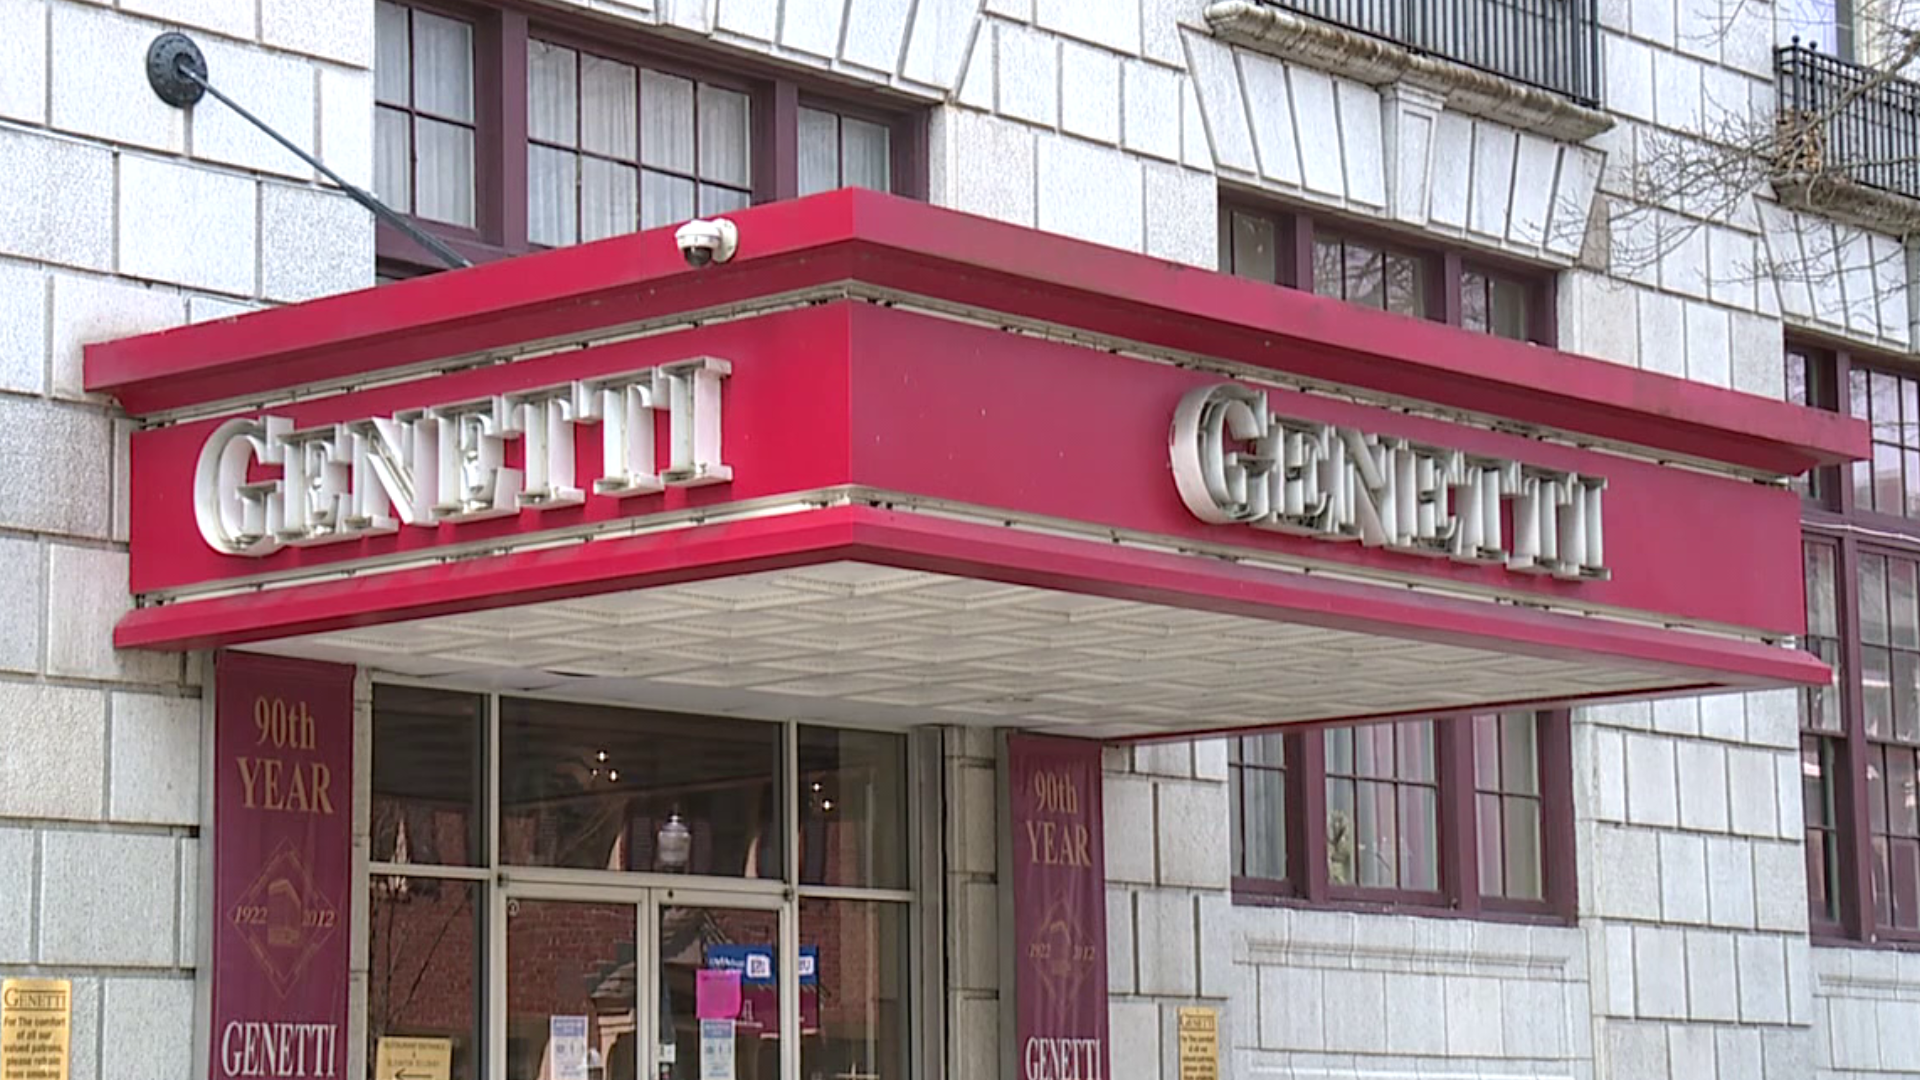 Windows on 4th is set to open up in late April at the Genetti Hotel.